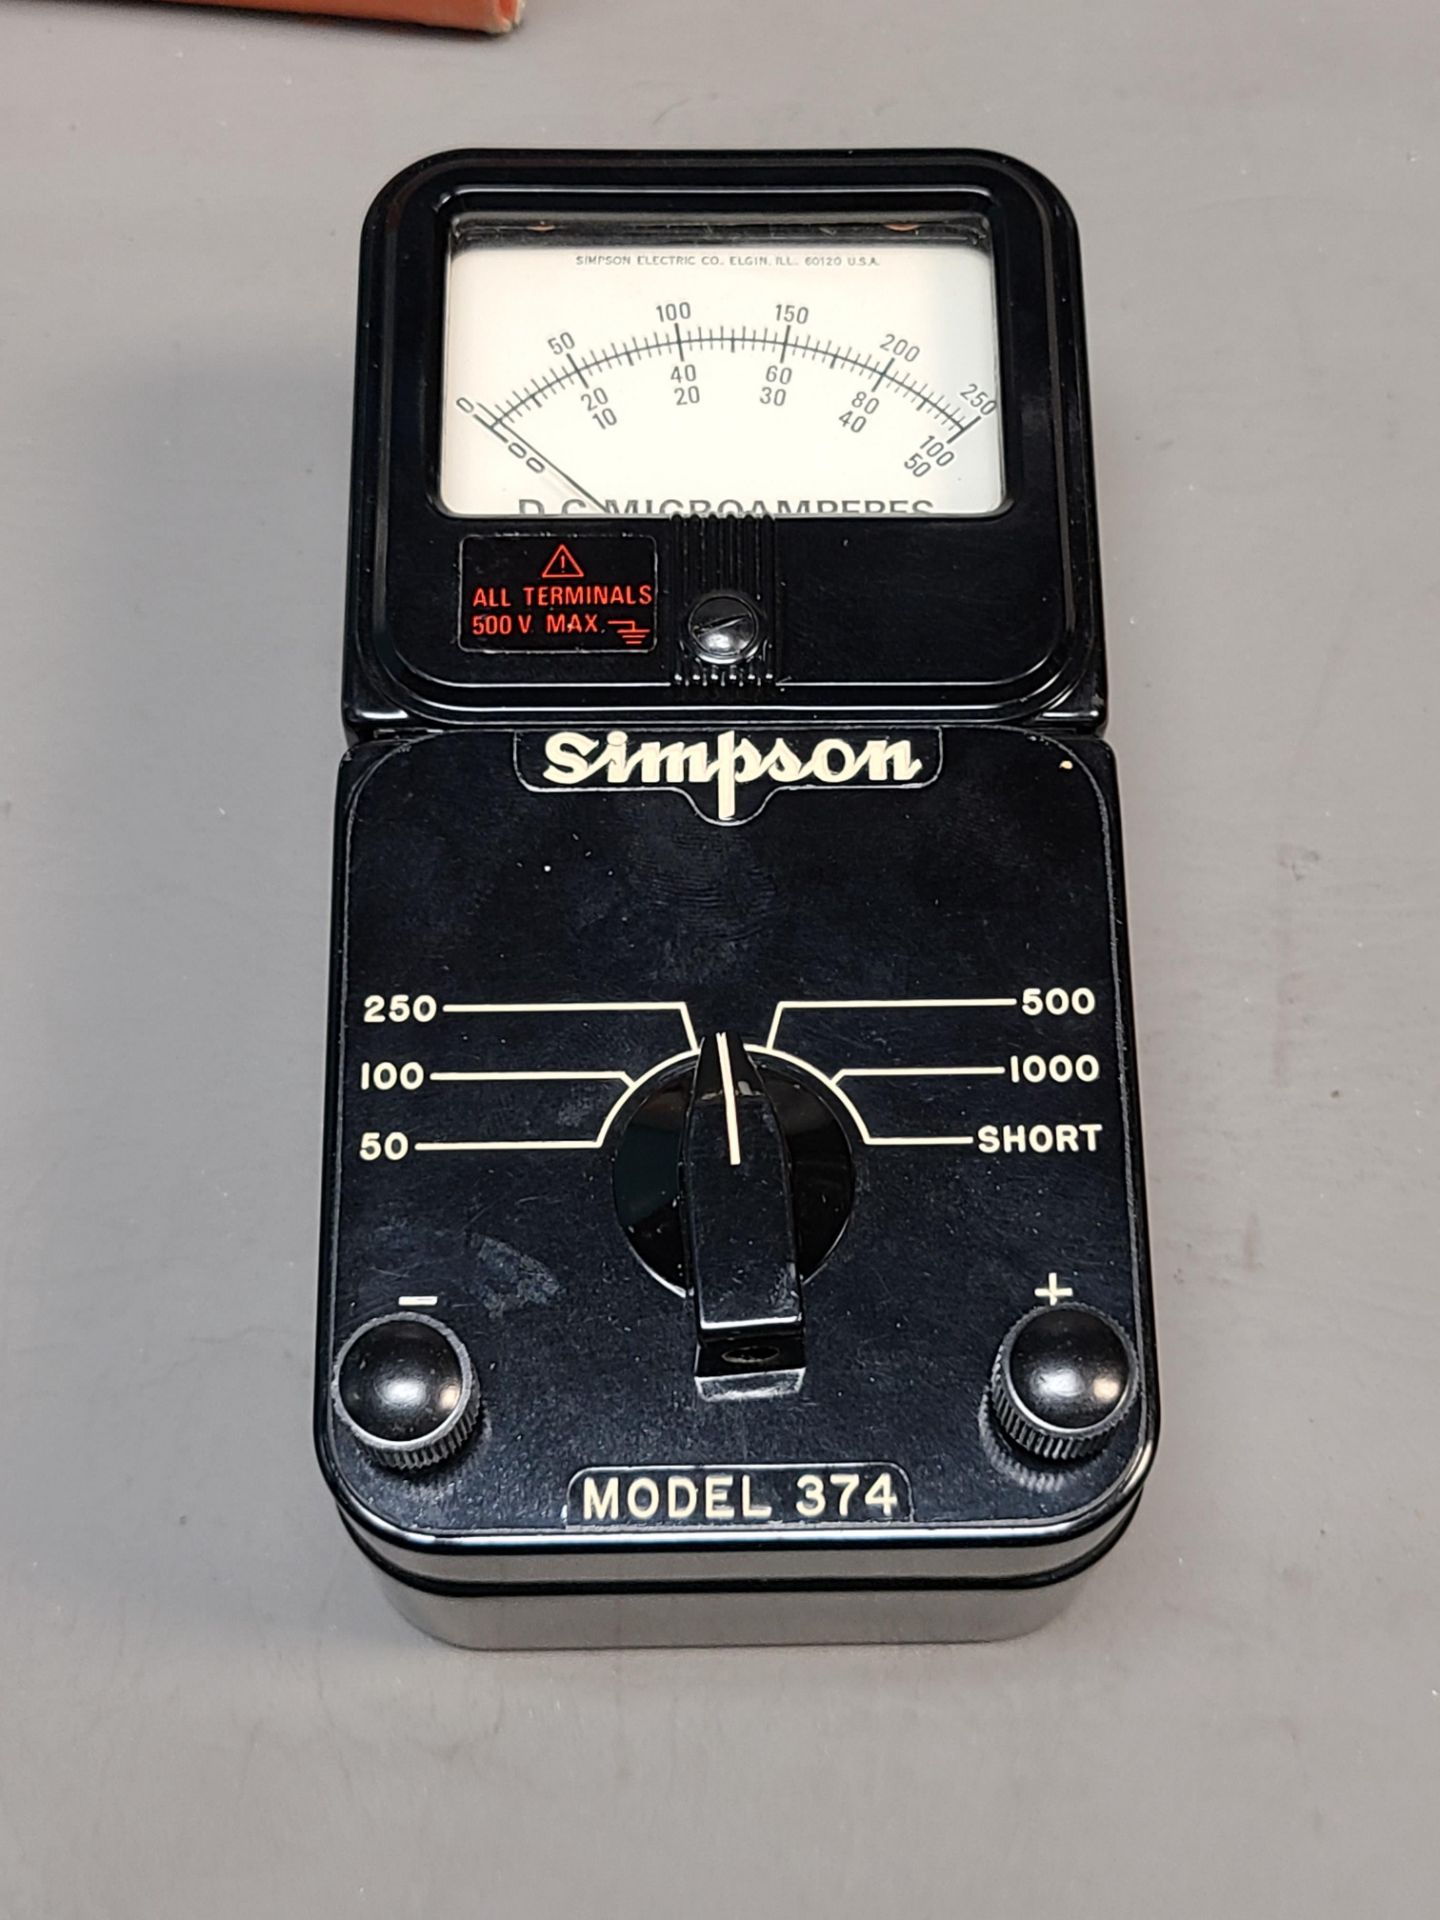 NEW SIMPSON DC MICROAMPERES METER - Image 5 of 9